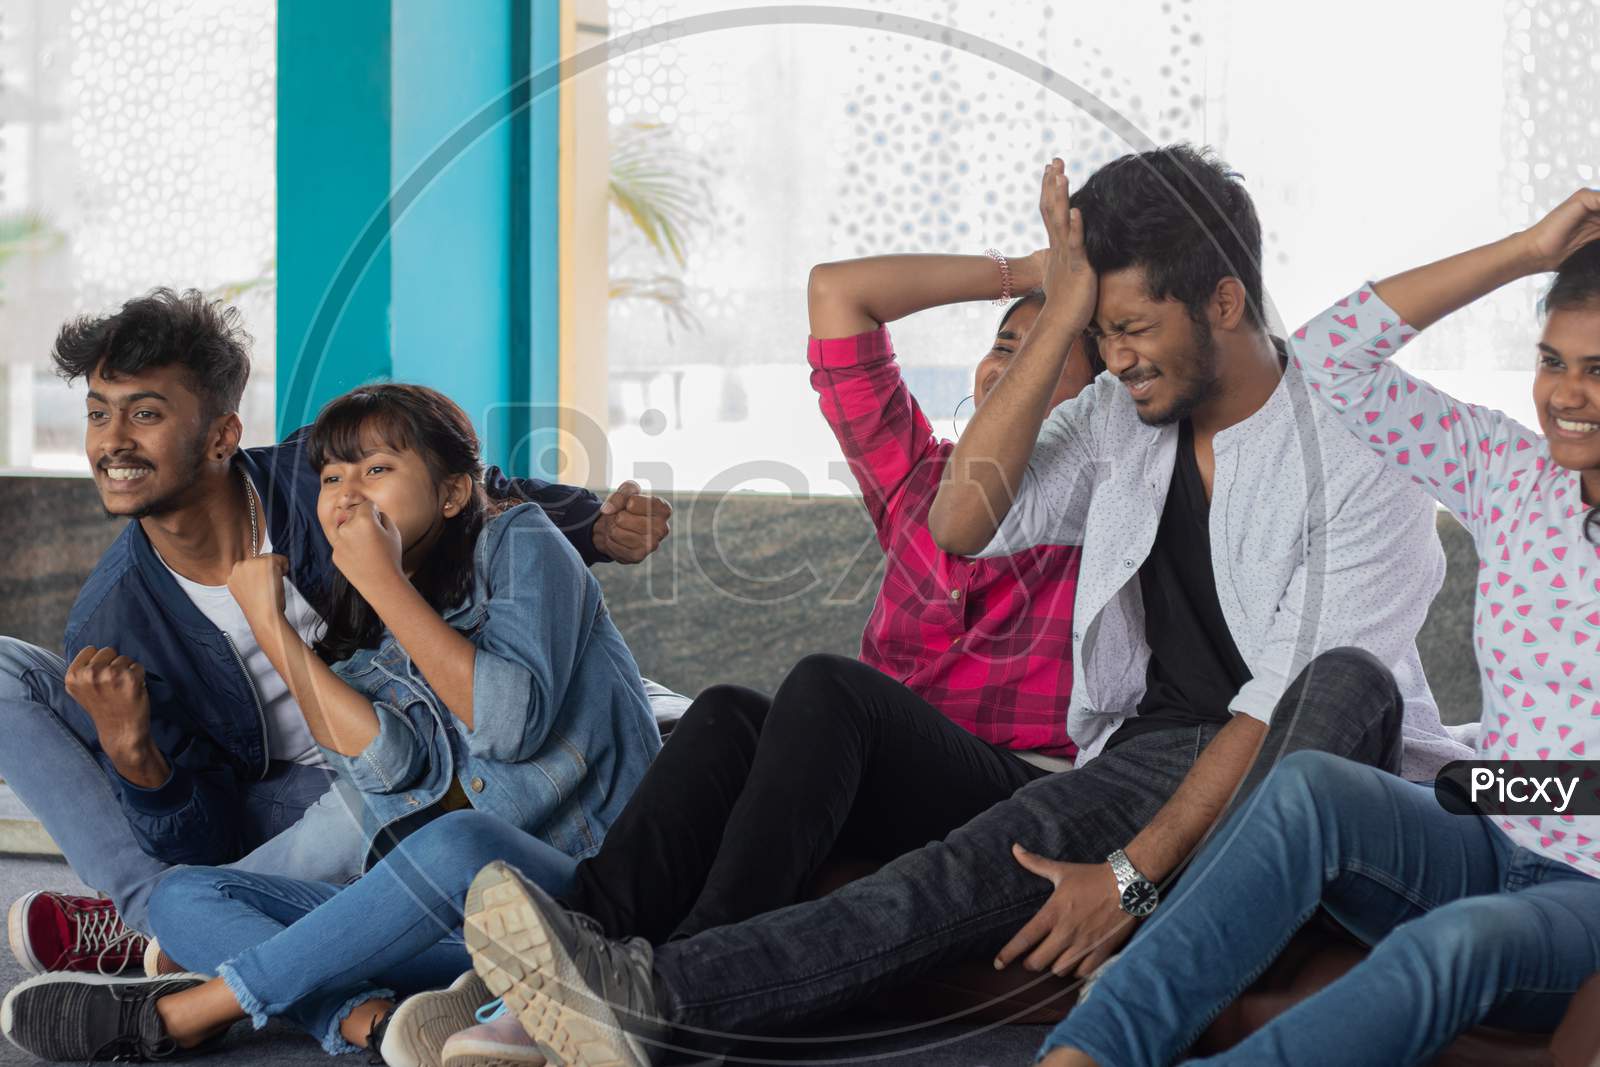 A Group of Happy Young People watching Television in Worried Mood